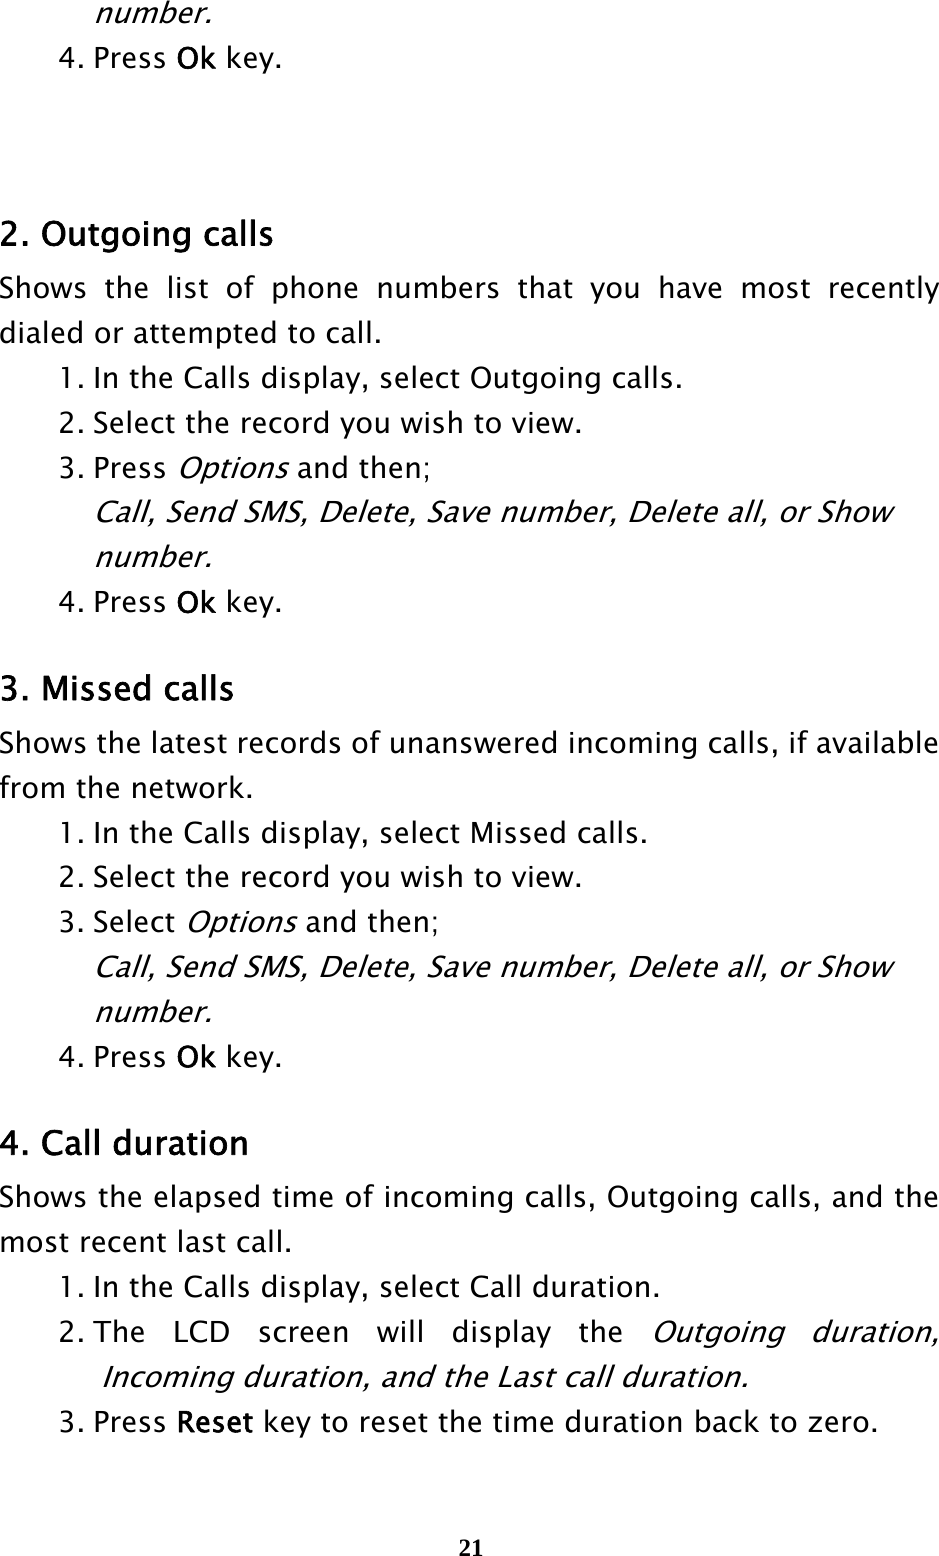  21   number.  4. Press Ok key.    2. Outgoing calls Shows the list of phone numbers that you have most recently dialed or attempted to call.     1. In the Calls display, select Outgoing calls.     2. Select the record you wish to view.    3. Press Options and then;     Call, Send SMS, Delete, Save number, Delete all, or Show     number.   4. Press Ok key.  3. Missed calls Shows the latest records of unanswered incoming calls, if available from the network.     1. In the Calls display, select Missed calls.   2. Select the record you wish to view.    3. Select Options and then;     Call, Send SMS, Delete, Save number, Delete all, or Show     number.   4. Press Ok key.  4. Call duration Shows the elapsed time of incoming calls, Outgoing calls, and the most recent last call.   1. In the Calls display, select Call duration.  2. The LCD screen will display the Outgoing duration, Incoming duration, and the Last call duration.  3. Press Reset key to reset the time duration back to zero. 